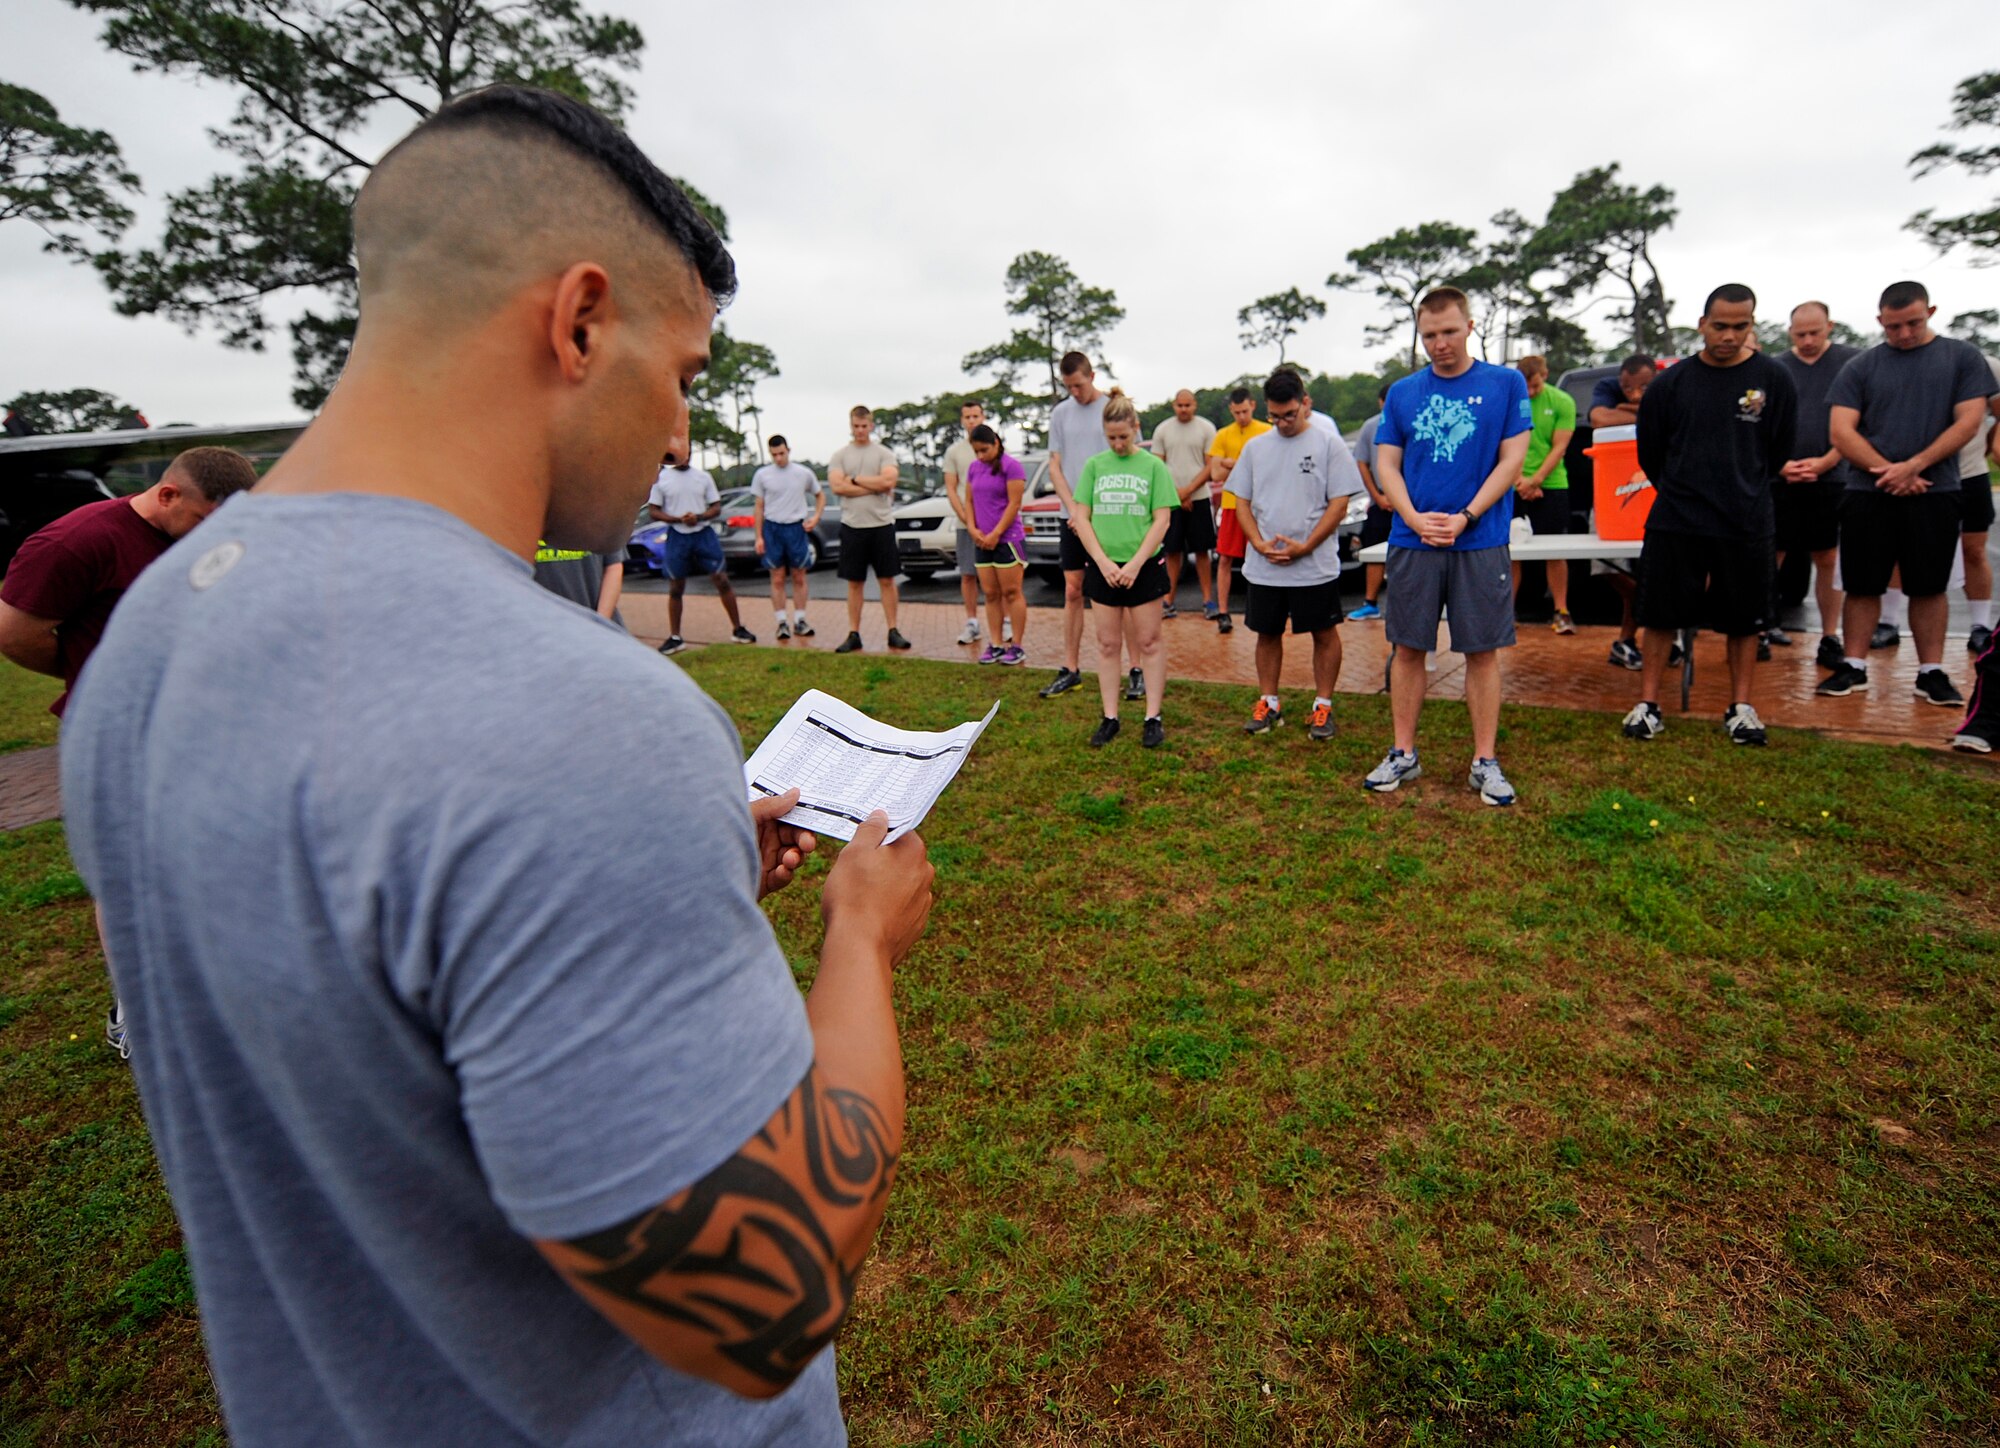 Staff Sgt. Christopher Mendez, 1st Special Operations Logistics Readiness Squadron air transportation journeyman, reads the names of deceased Airmen at Hurlburt Field, Fla., May 14, 2014. The Airmen gathered for a 5K run to honor Air Transportation Airmen who lost their lives while serving in the Air Force. (U.S. Air Force photo/Staff Sgt. Jeff Andrejcik)  